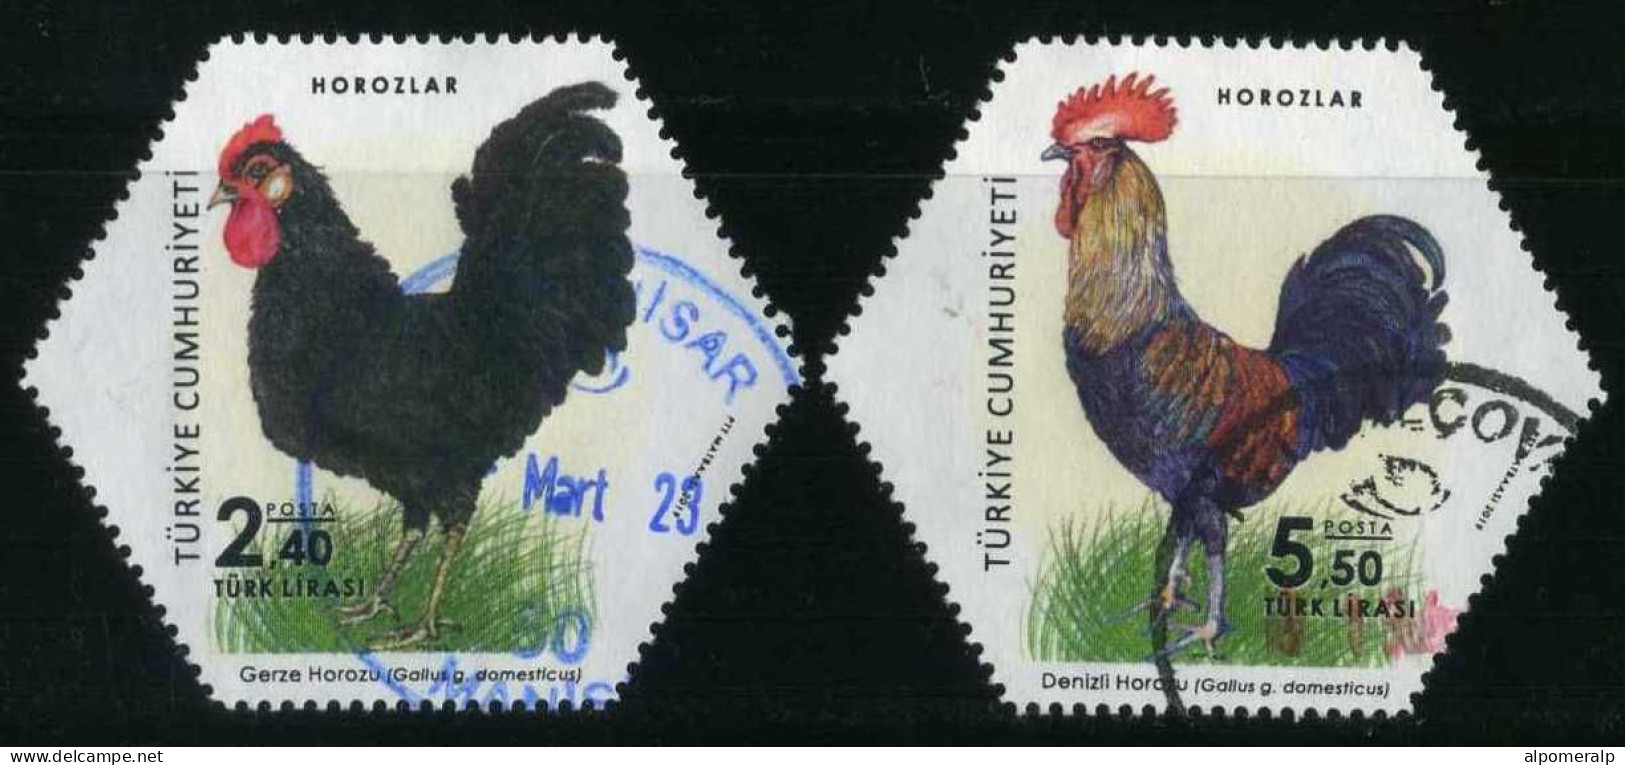 Türkiye 2019 Mi 4543-4544 Roosters, Birds, Poultry, Rooster And Chicken, Gallus Gallus Domesticus - Used Stamps